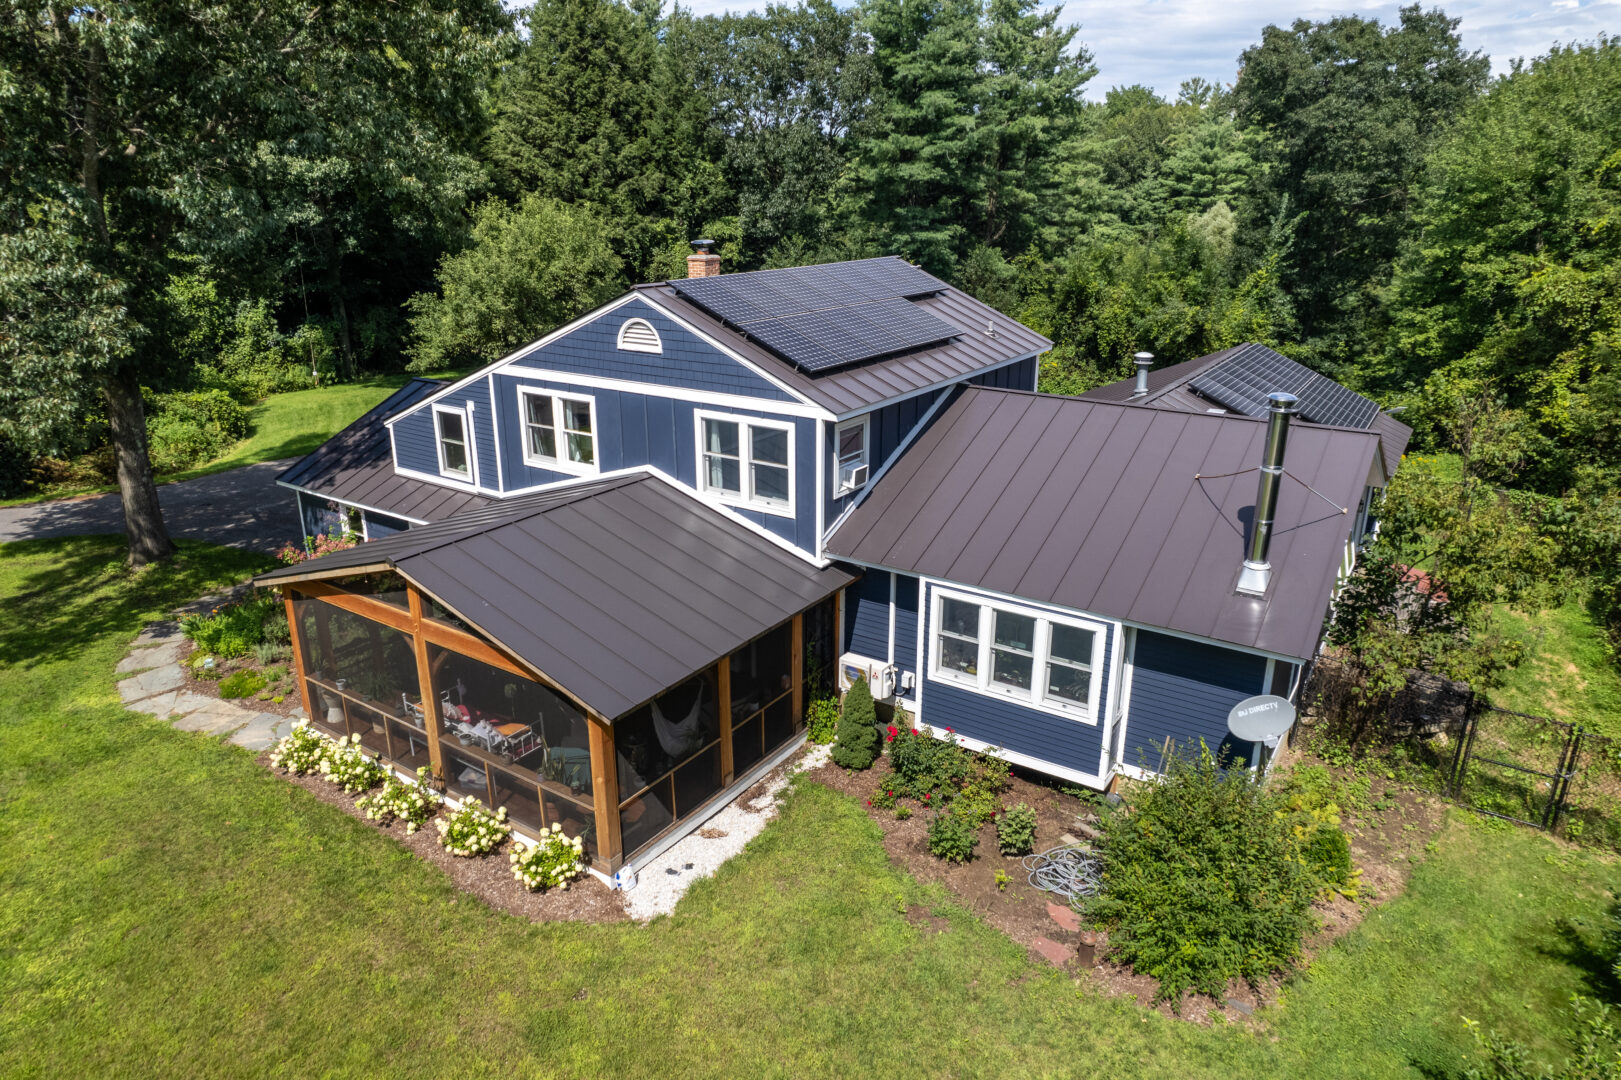 Aerial view of a blue house in Vermont with a stunning standing seam metal roof and solar panels